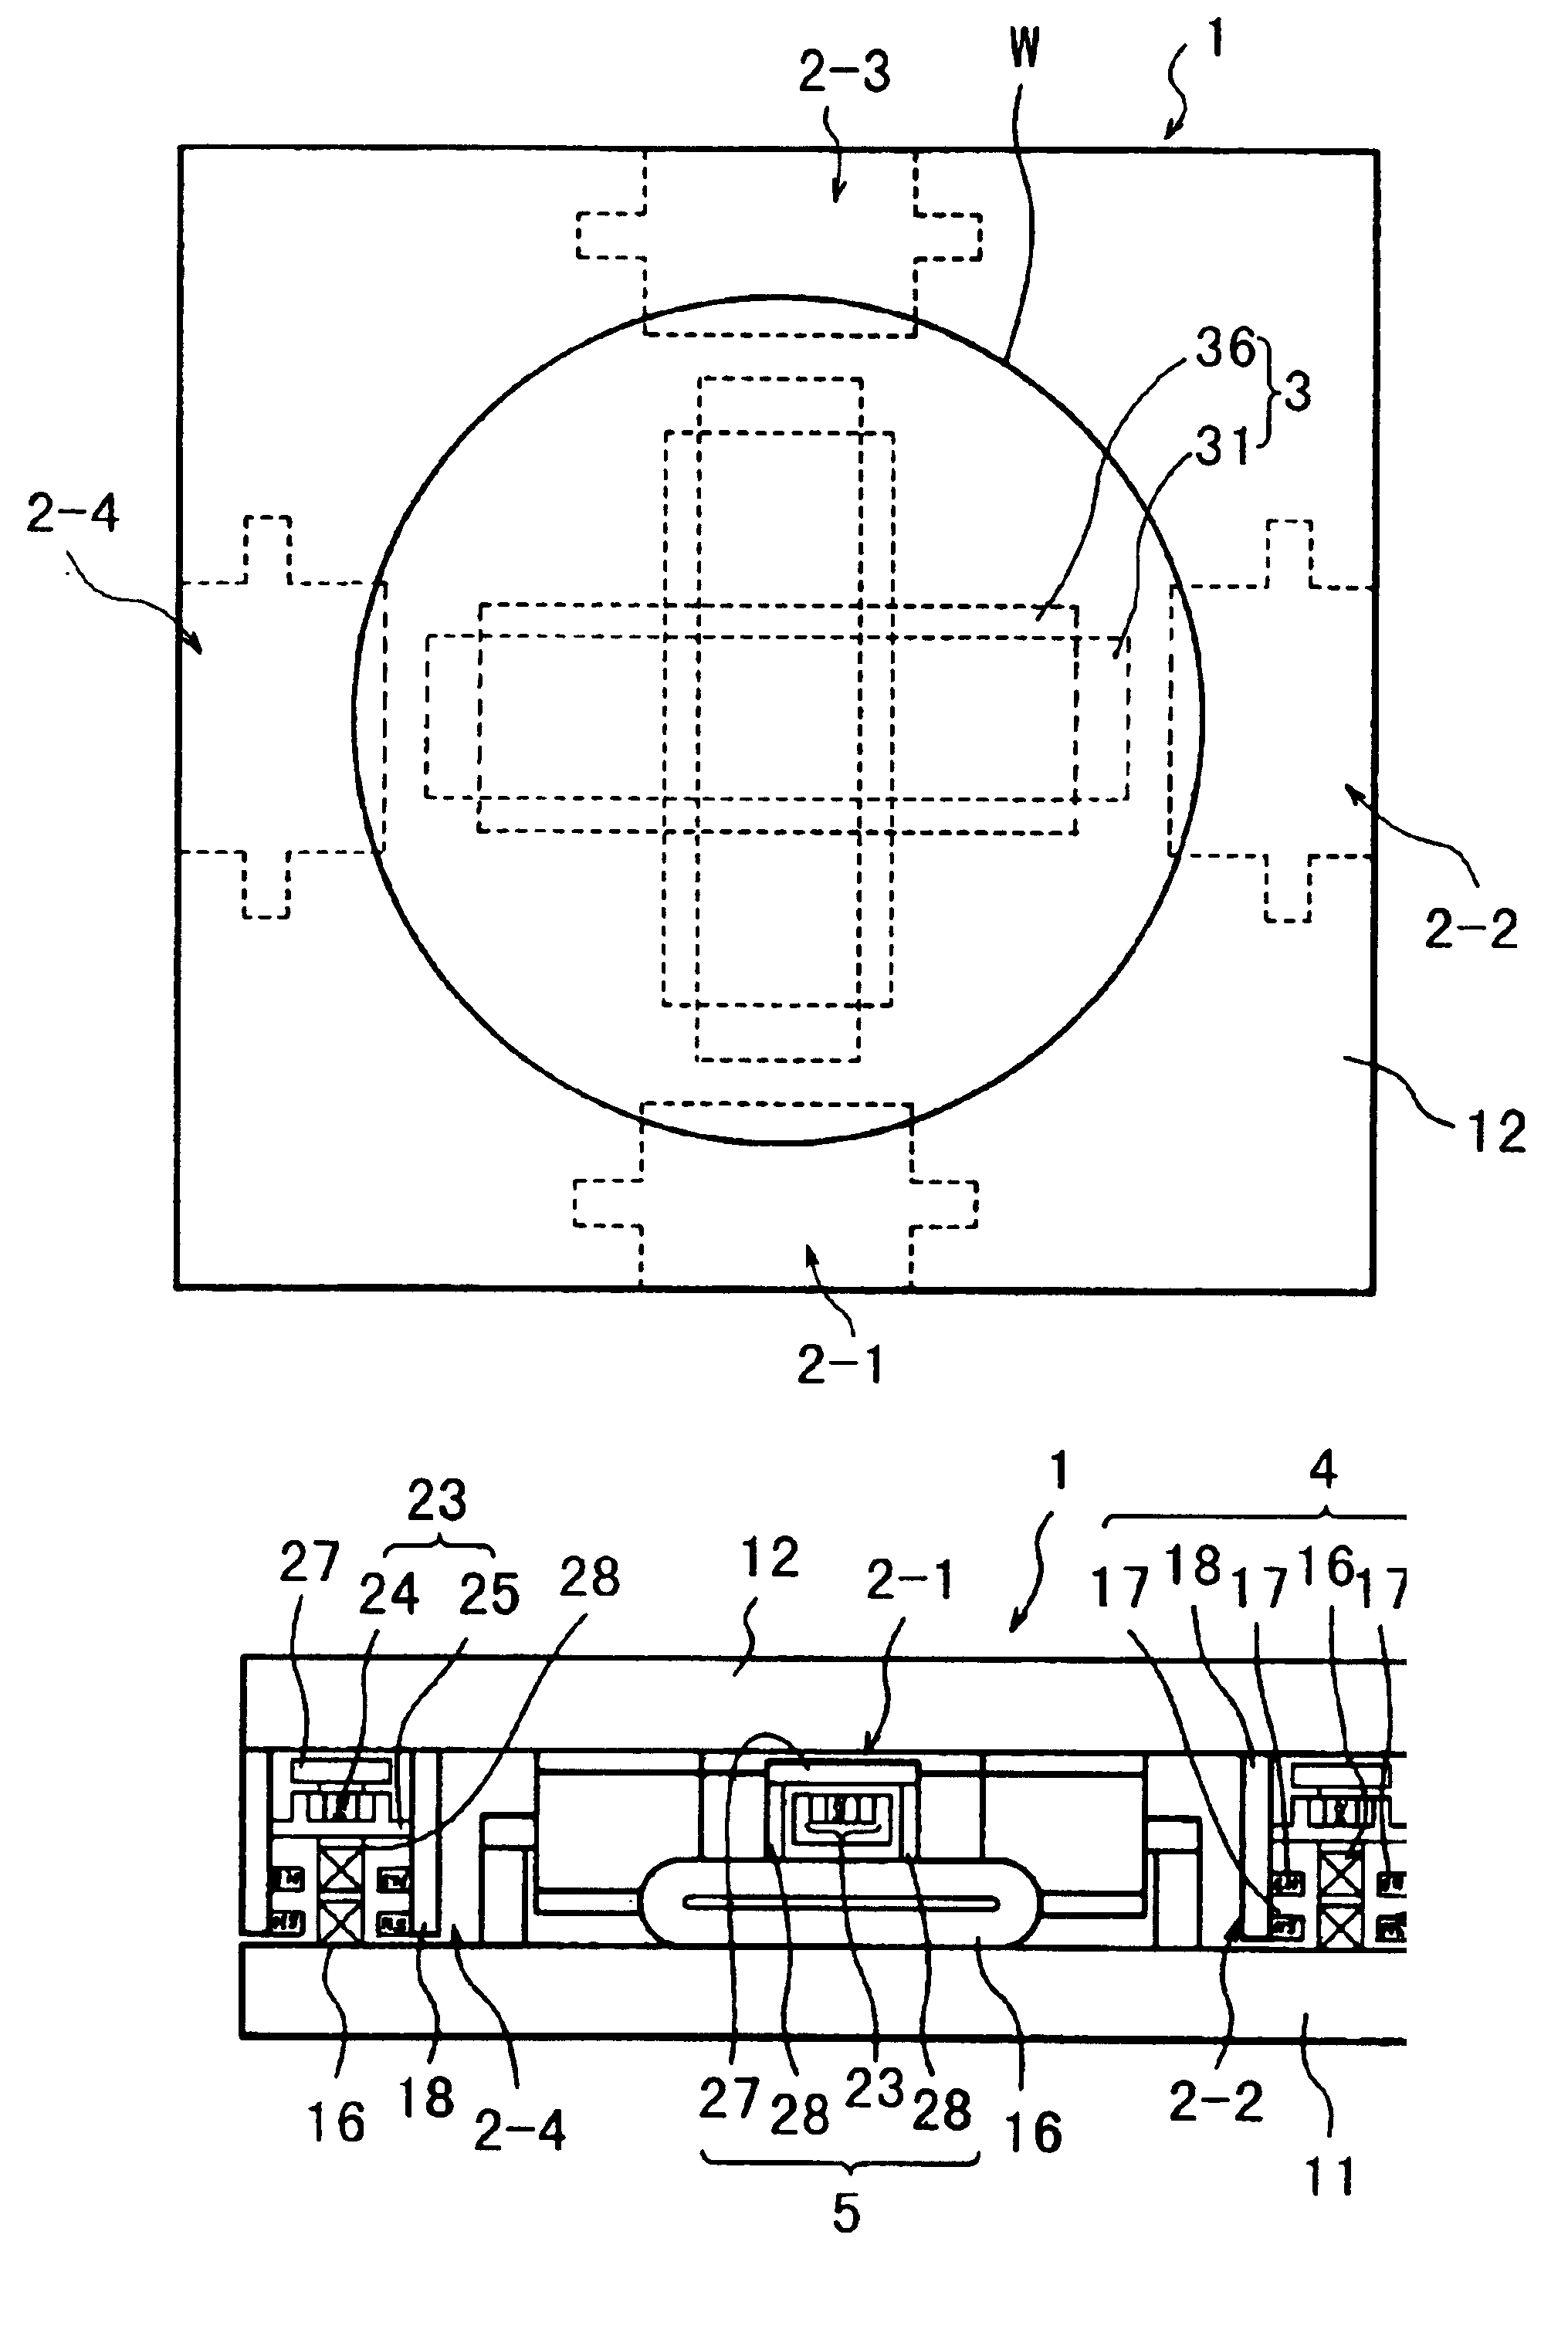 Supporting system in exposure apparatus